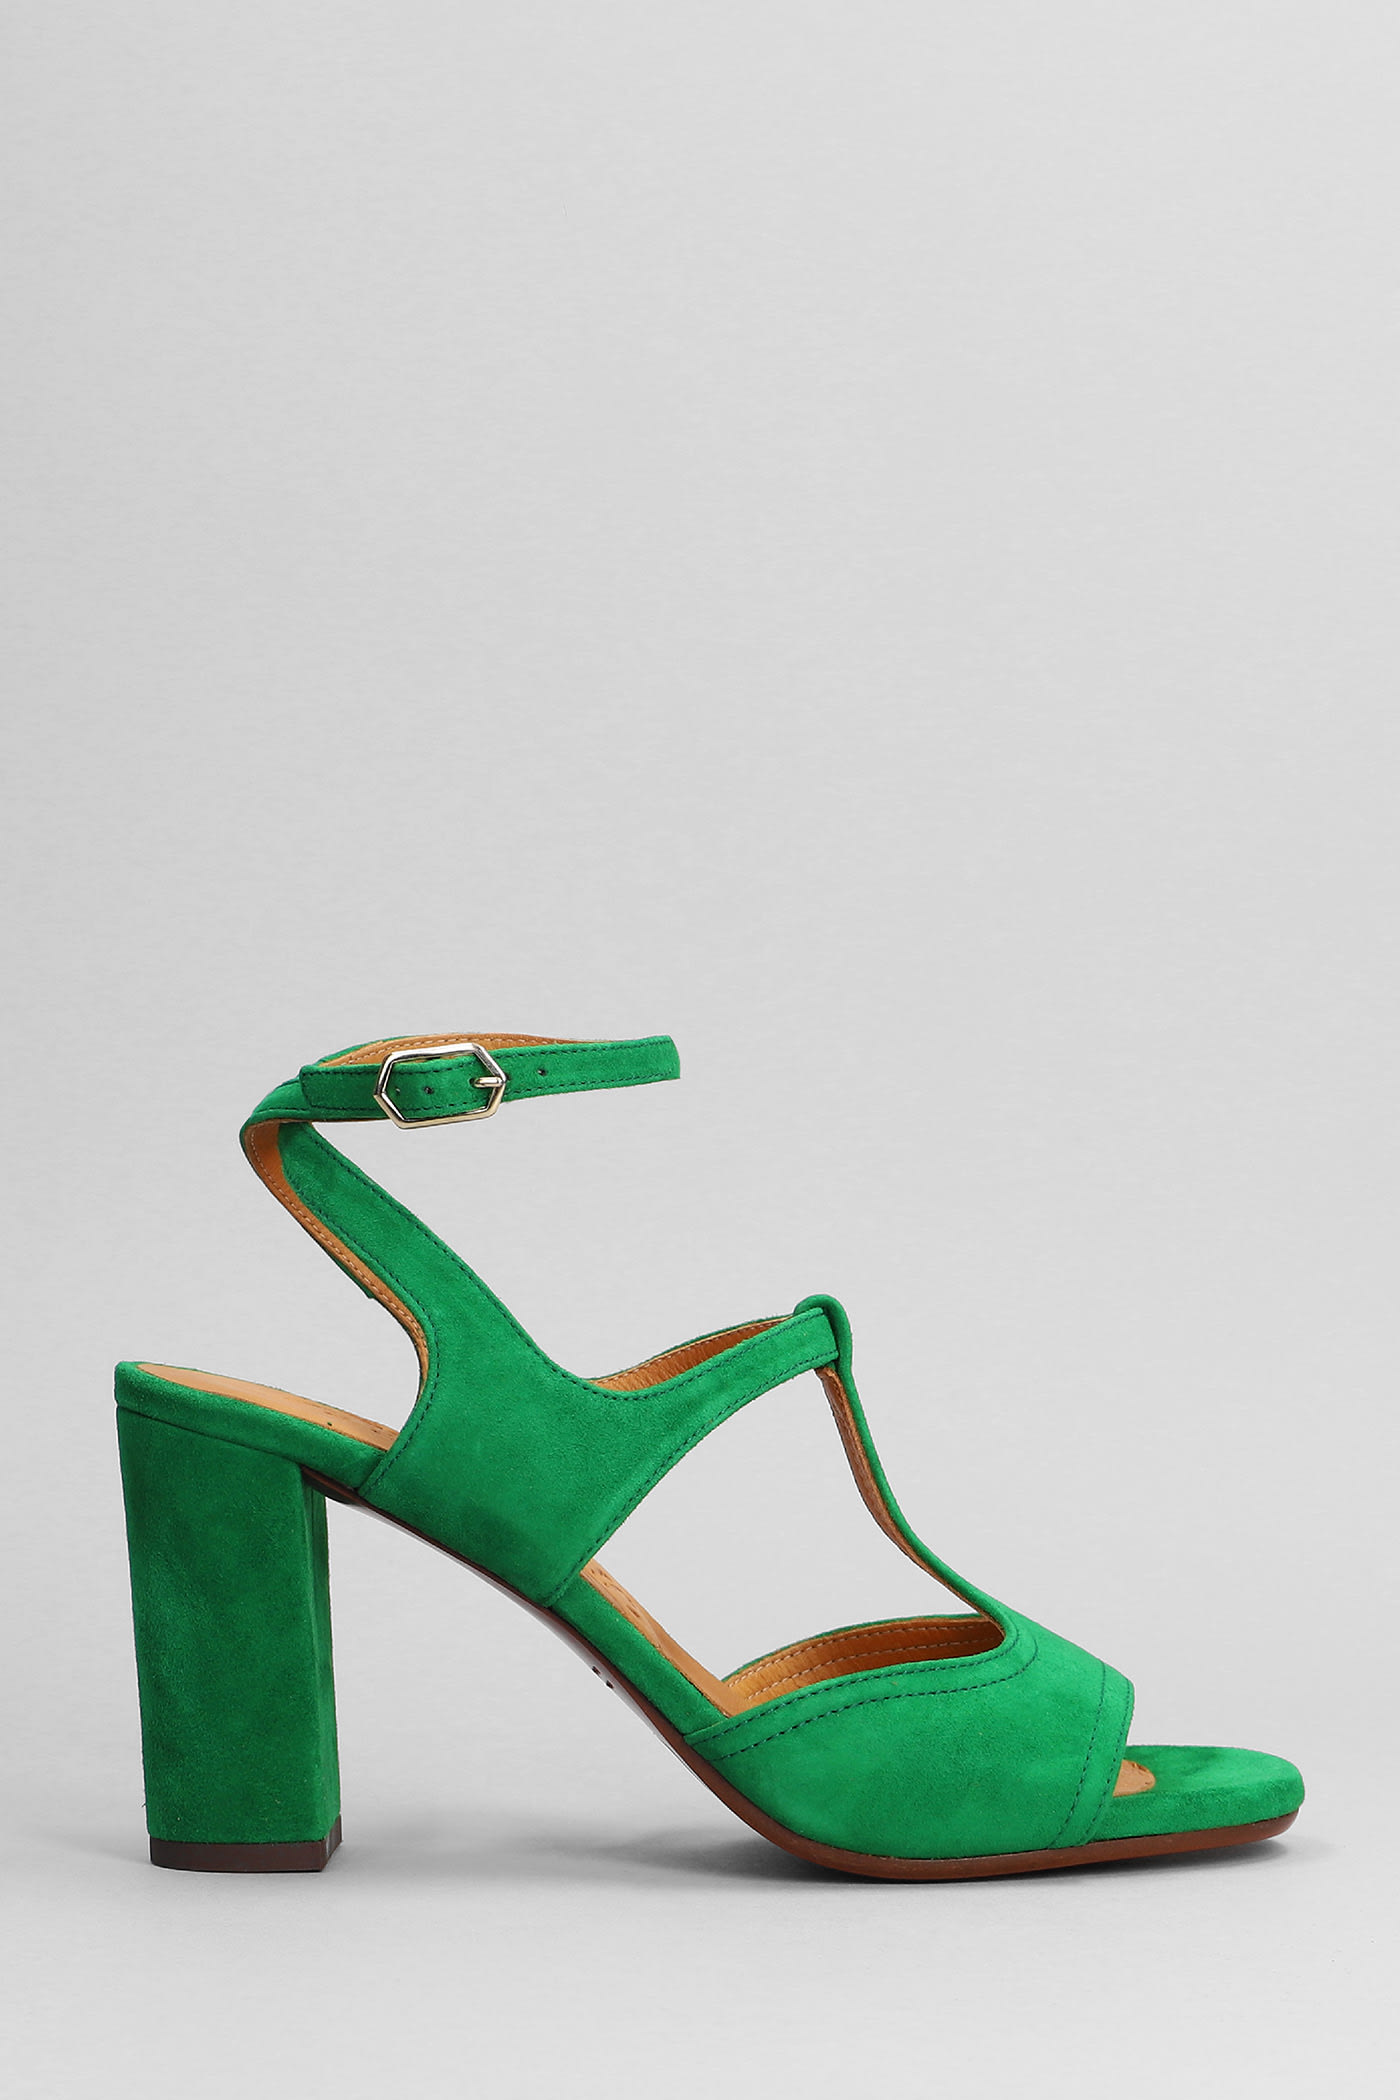 Chie Mihara Bashira Sandals In Green Suede